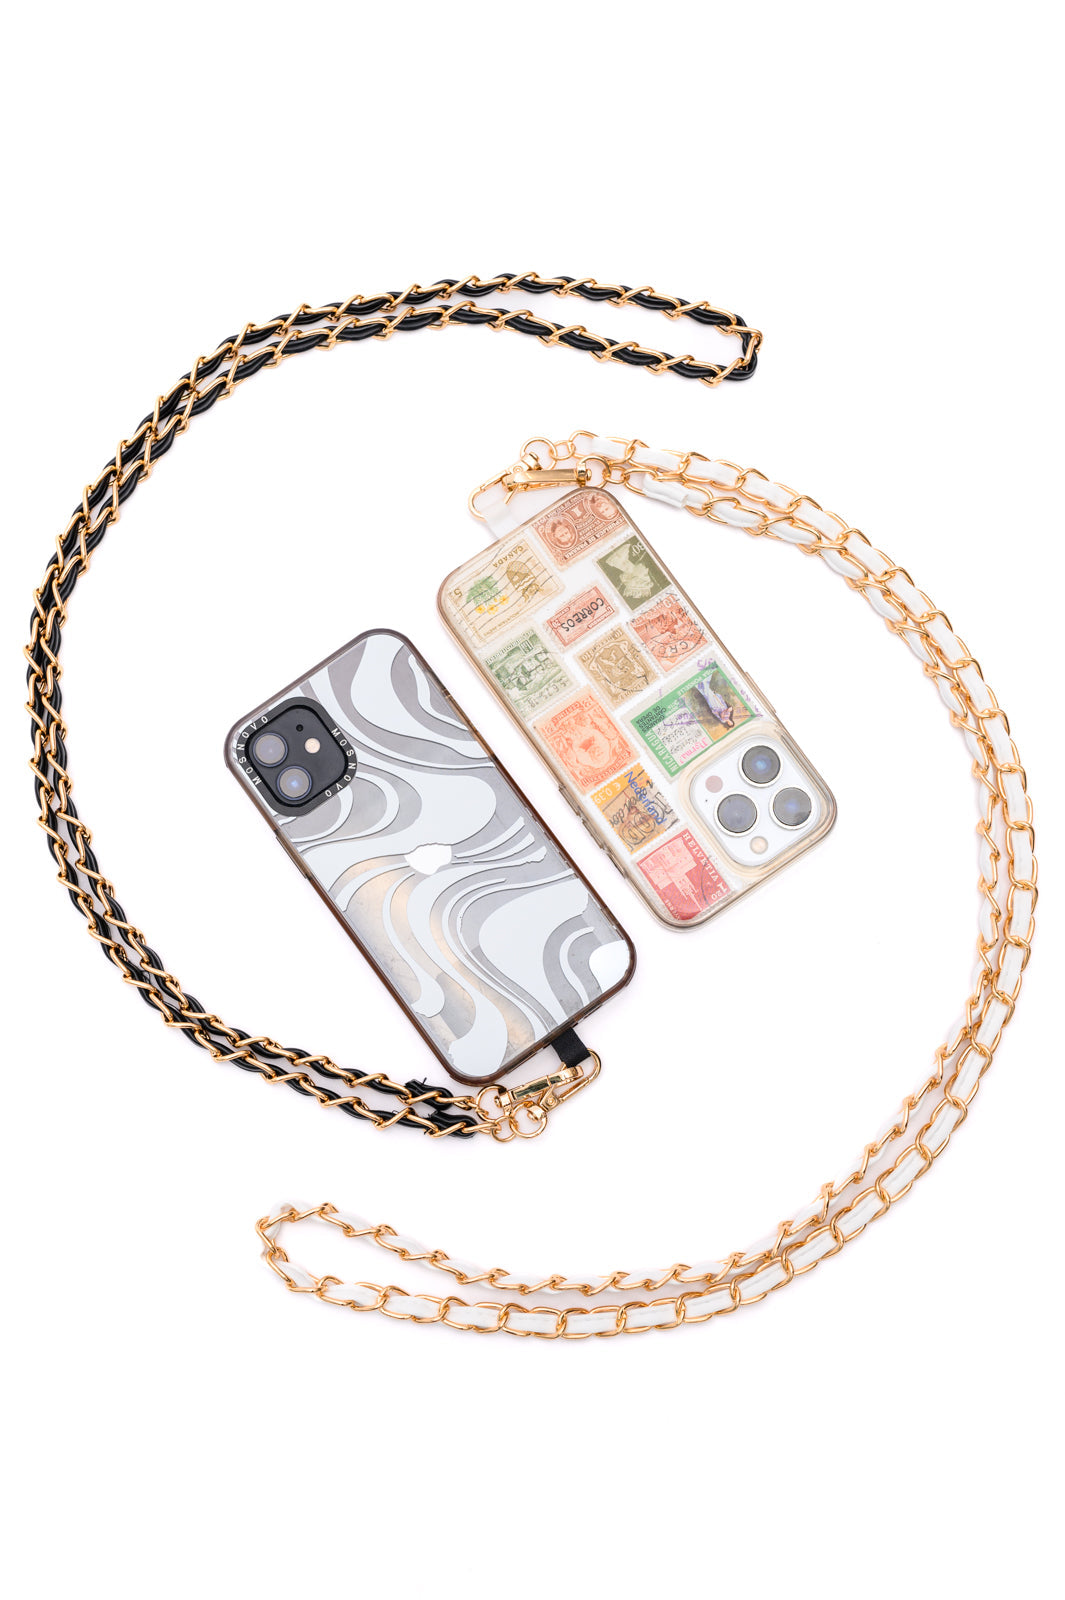 PU Leather Gold Chain Cell Phone Lanyard Set of 2 **FINAL SALE**